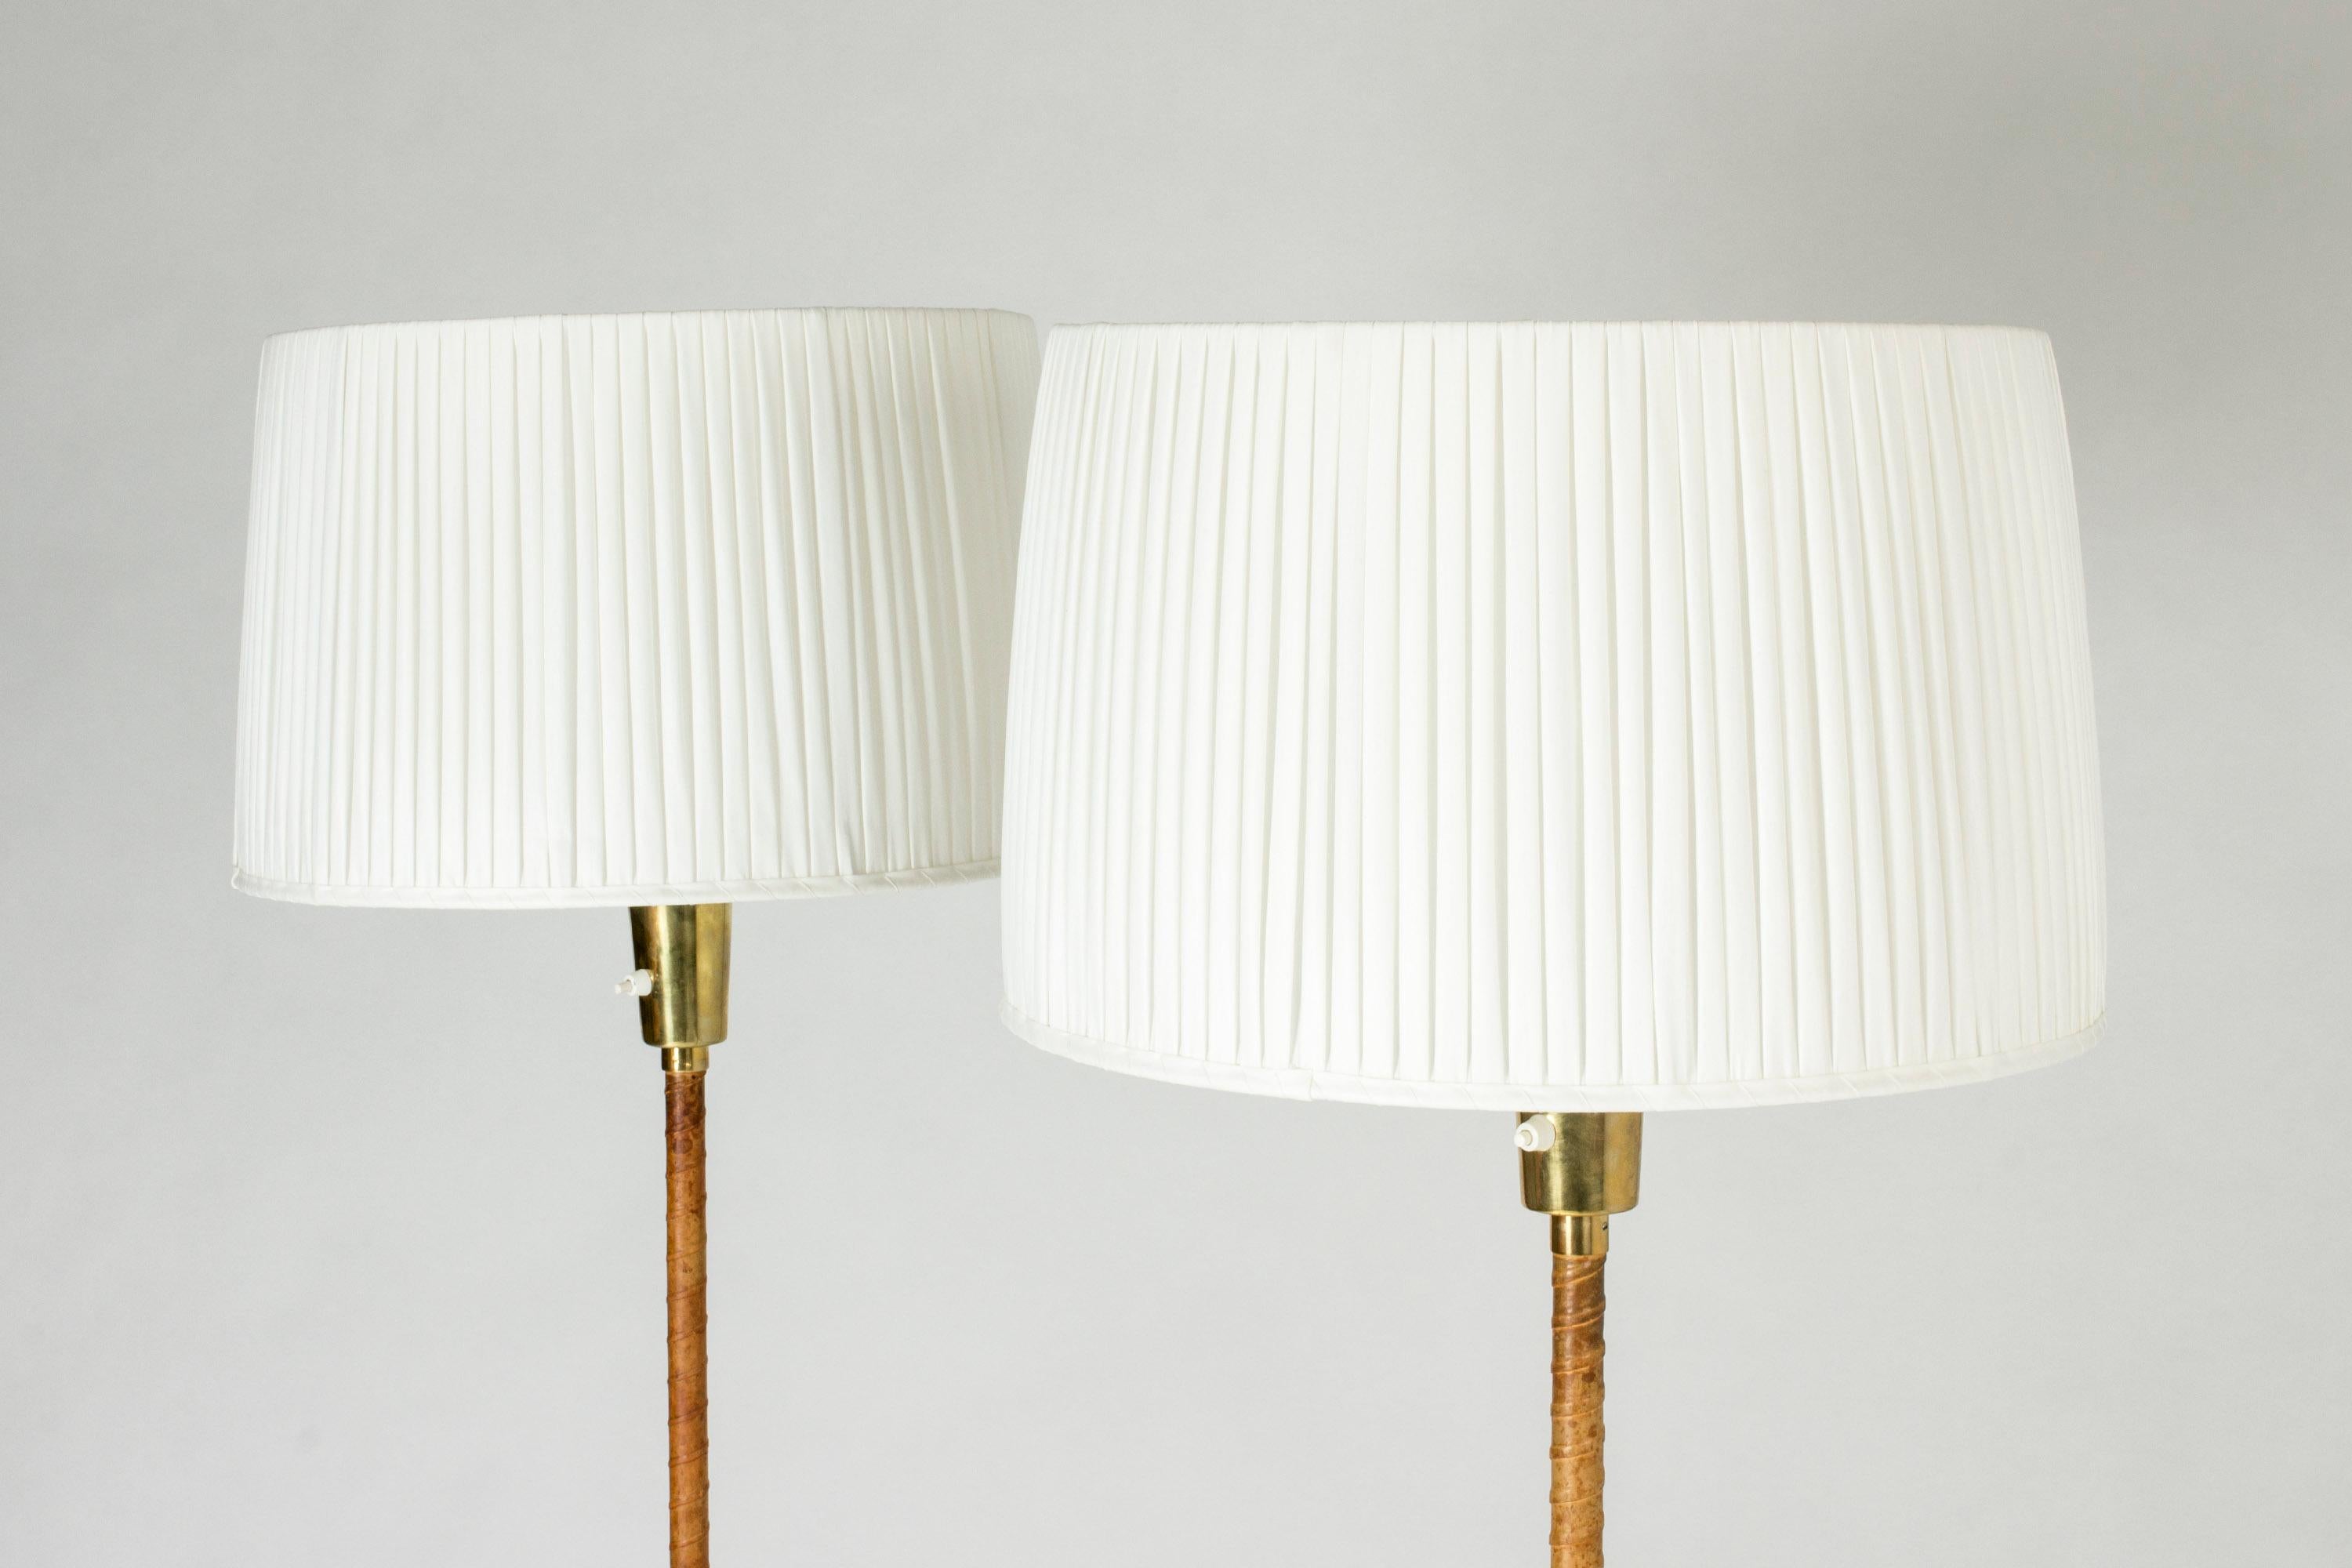 Brass Pair of Floor Lamps by Lisa Johansson-Pape for Orno For Sale